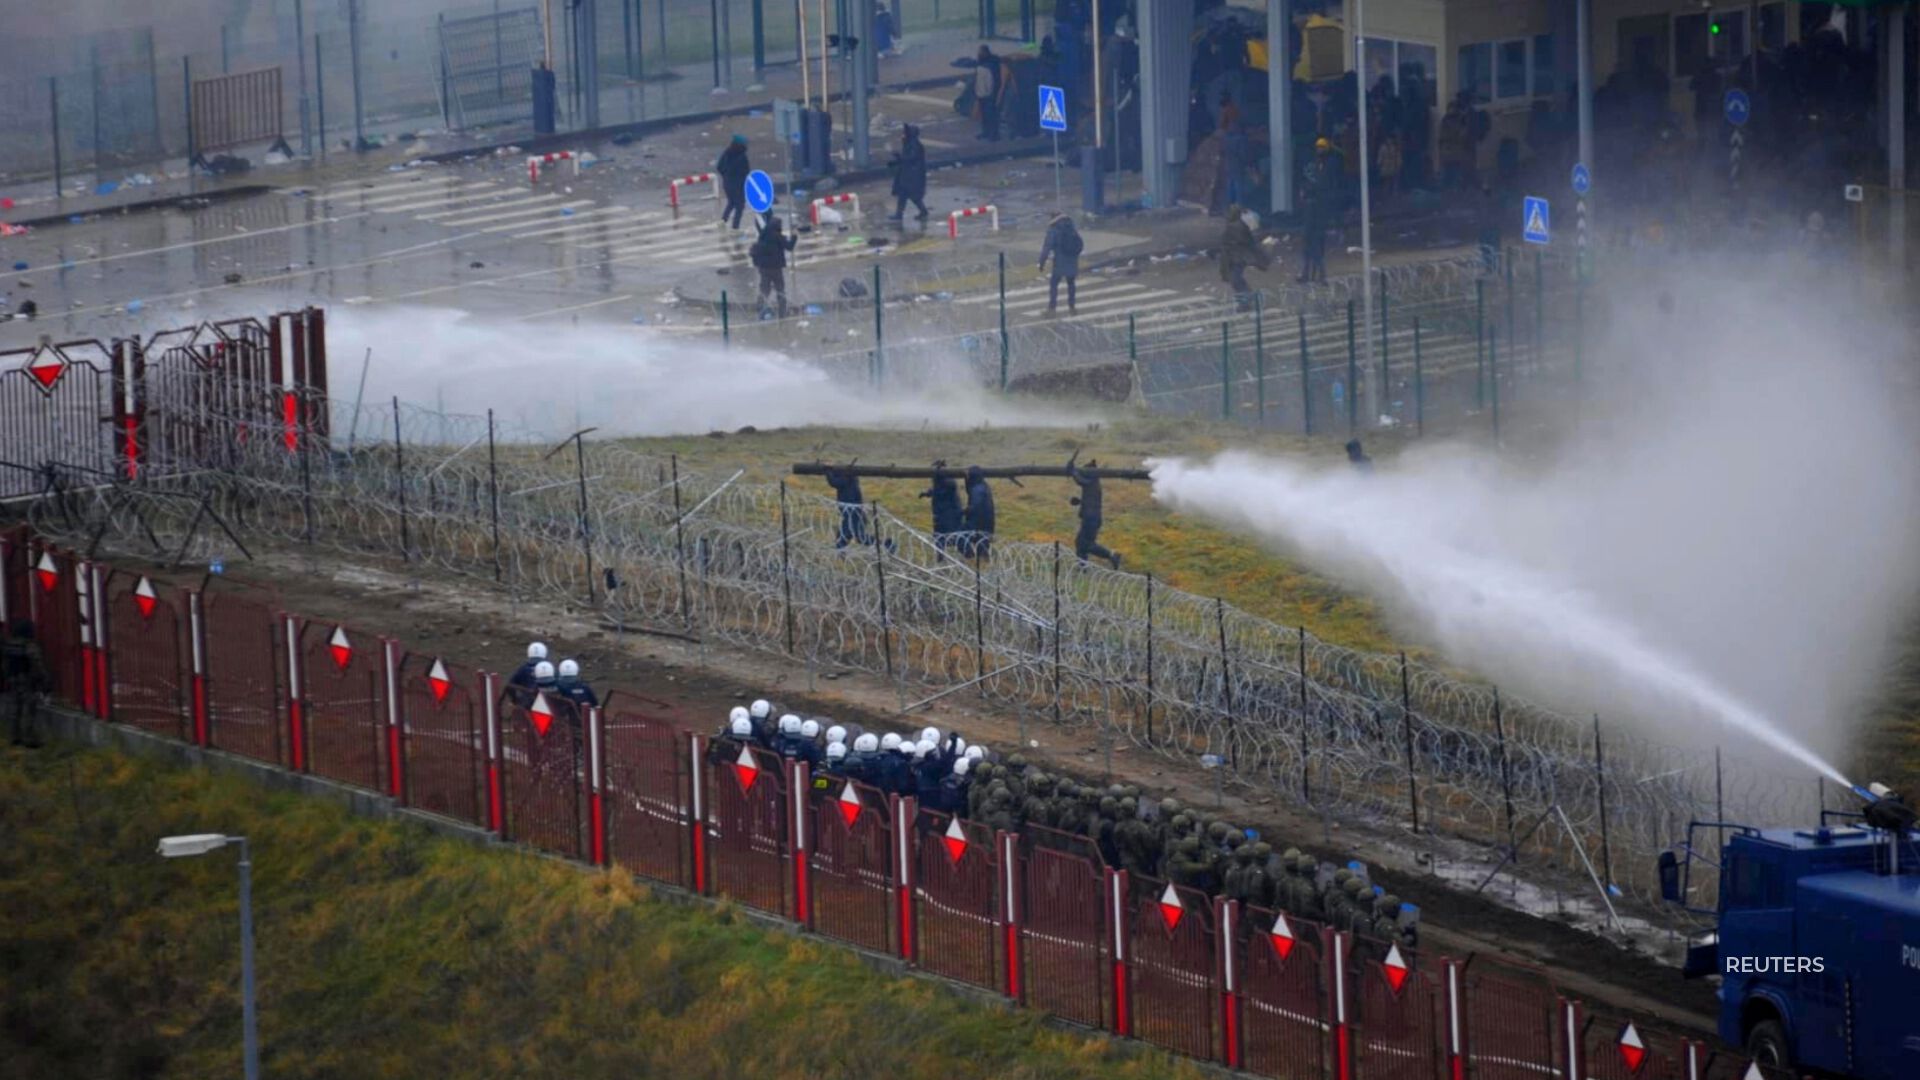 Polish forces used water cannons at the Belarusian border.